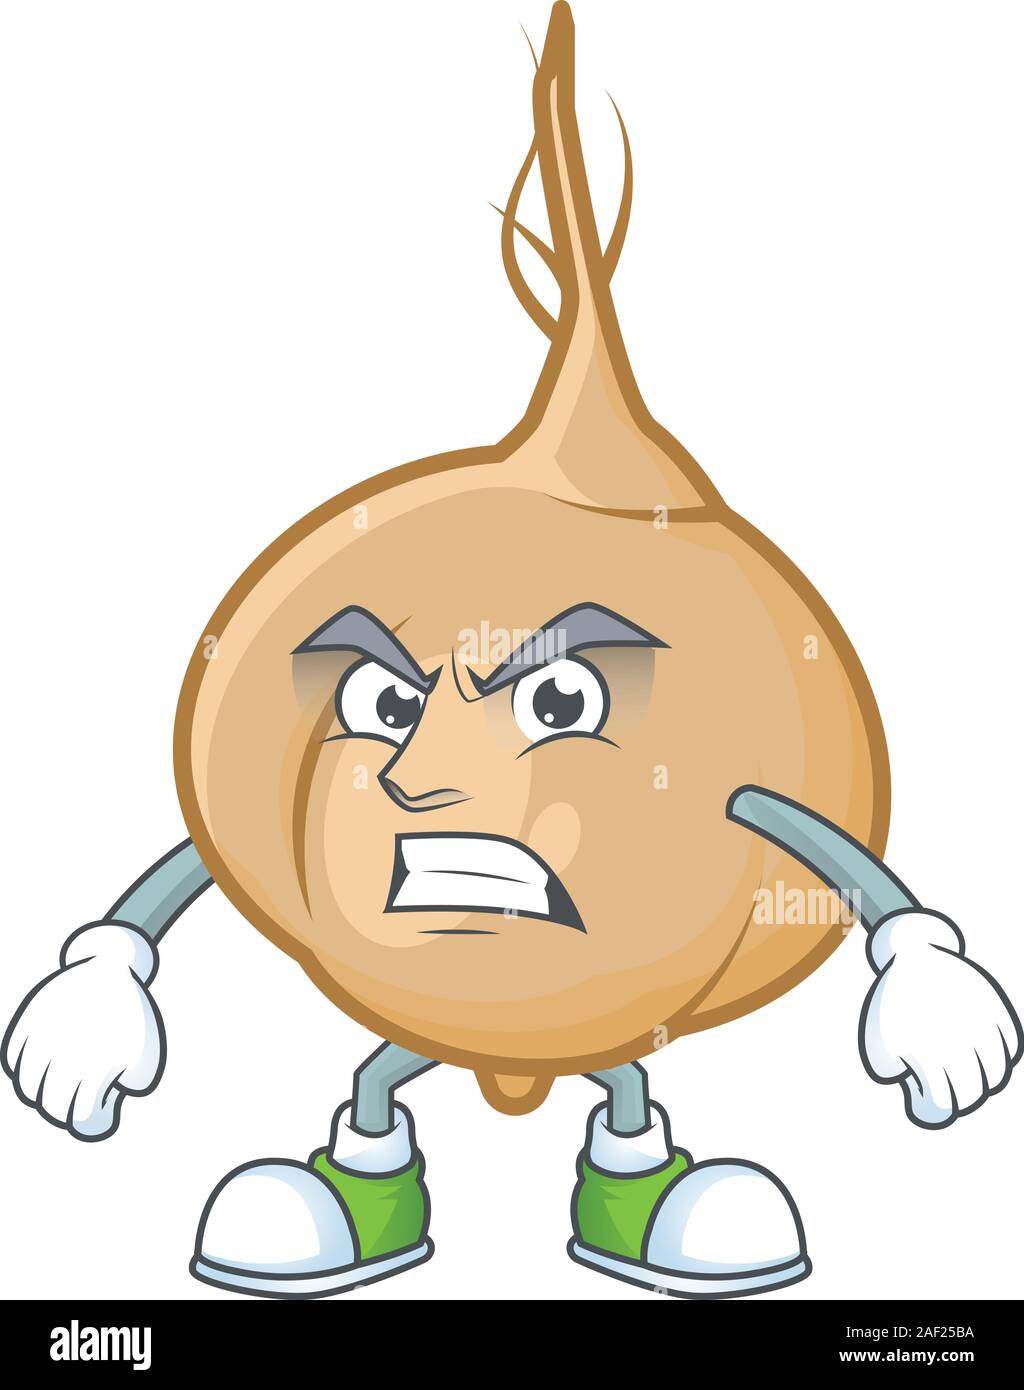 Jicama cartoon character style with angry face Stock Vector